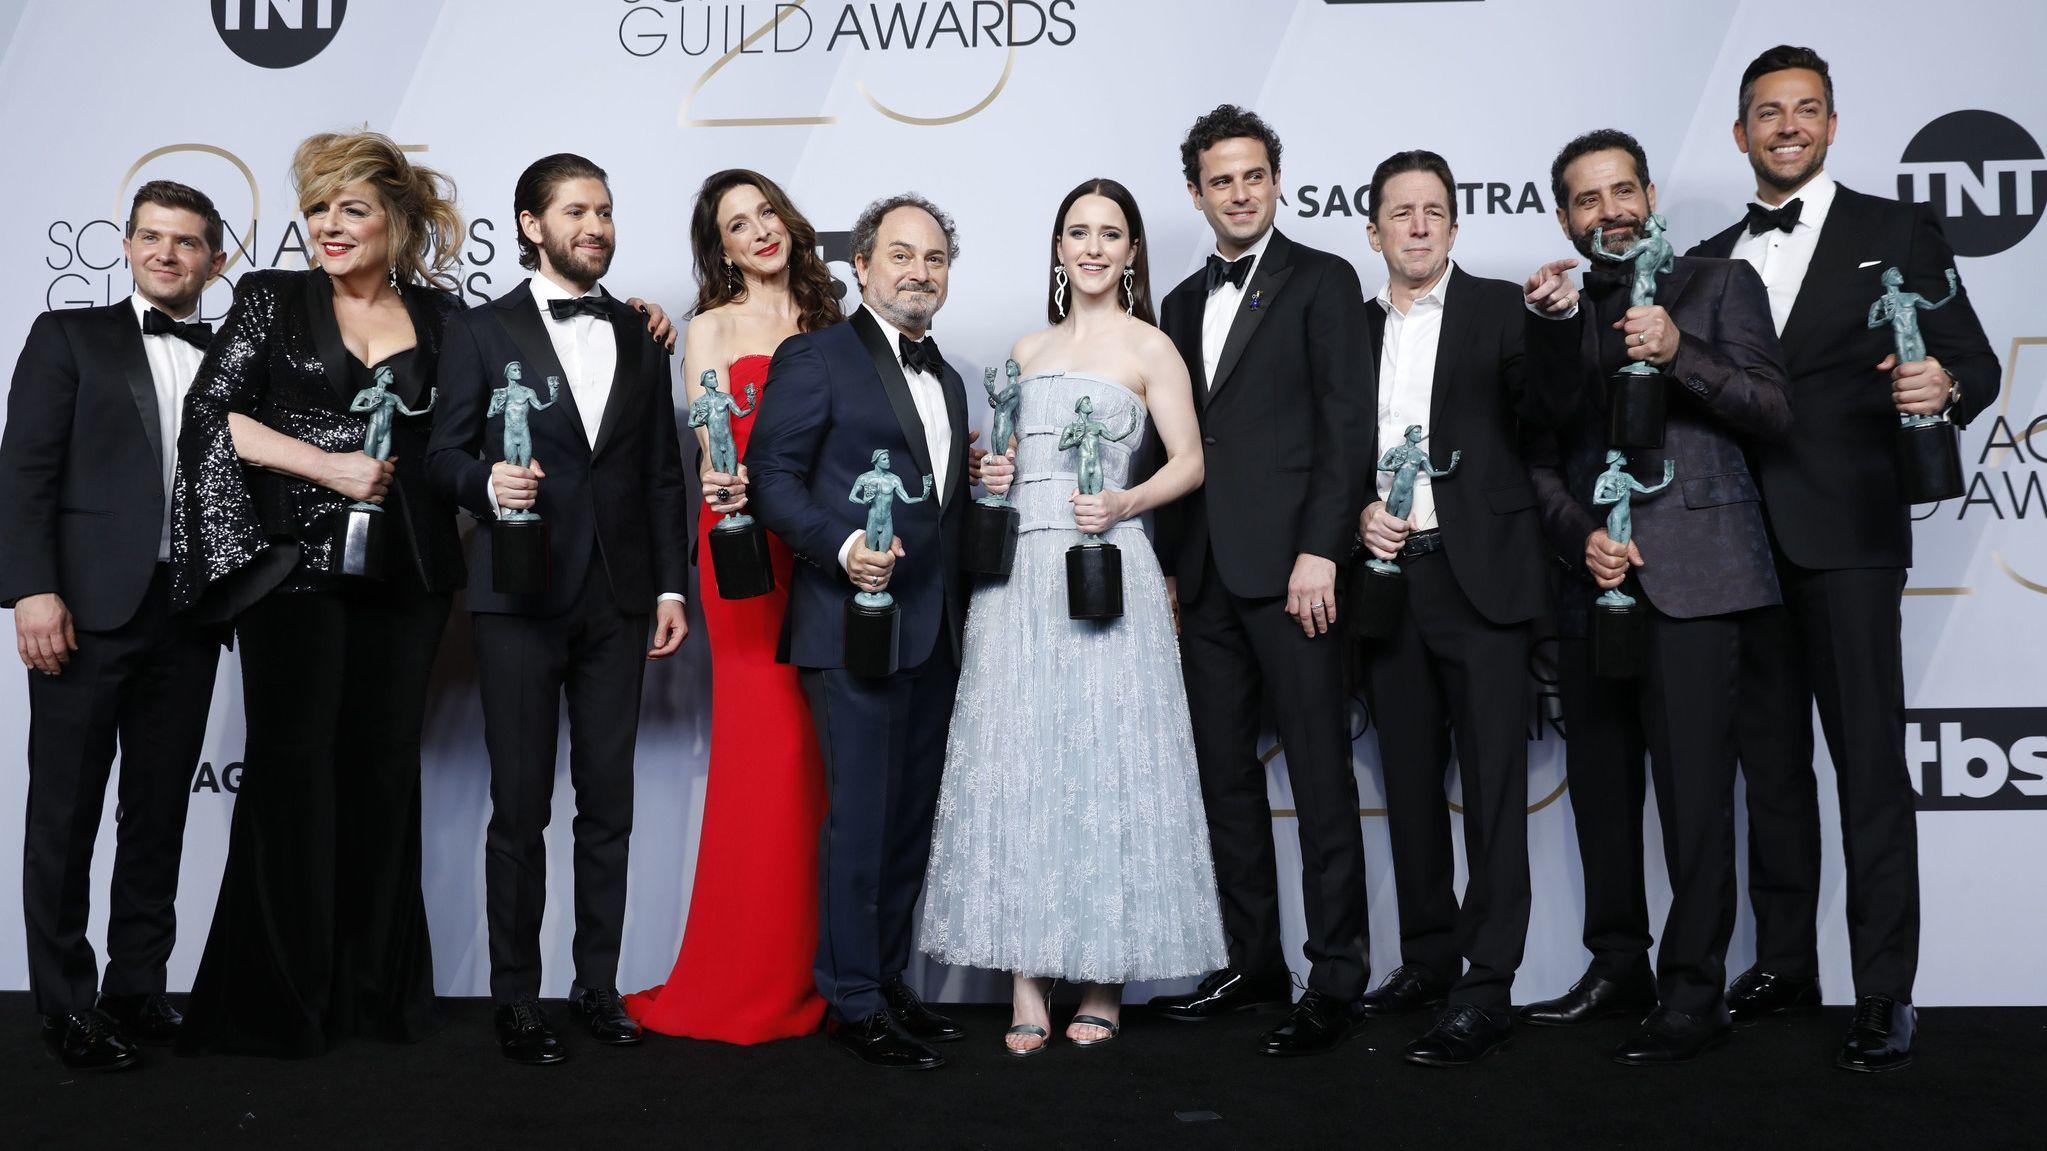 The complete list of winners and nominees for the 2019 Screen Actors Guild Awards